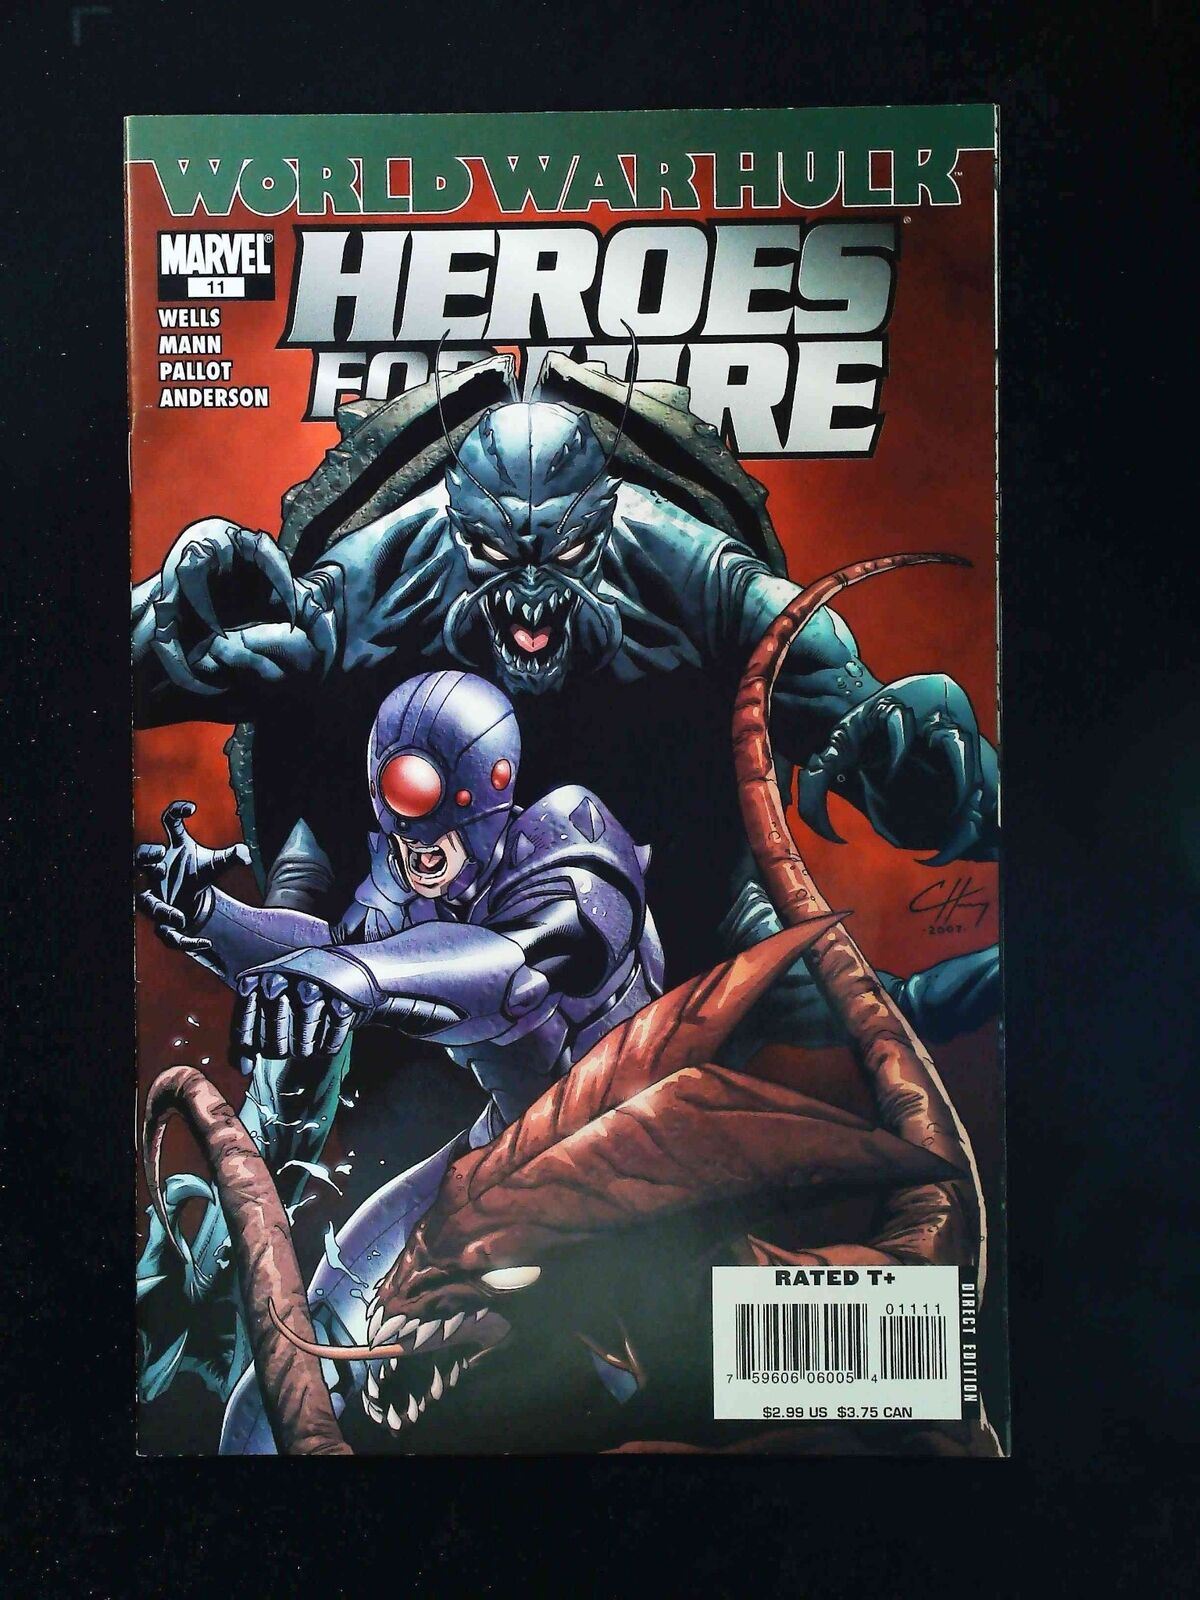 Heroes For Hire #11 (2Nd Series) Marvel Comics 2007 Vf+